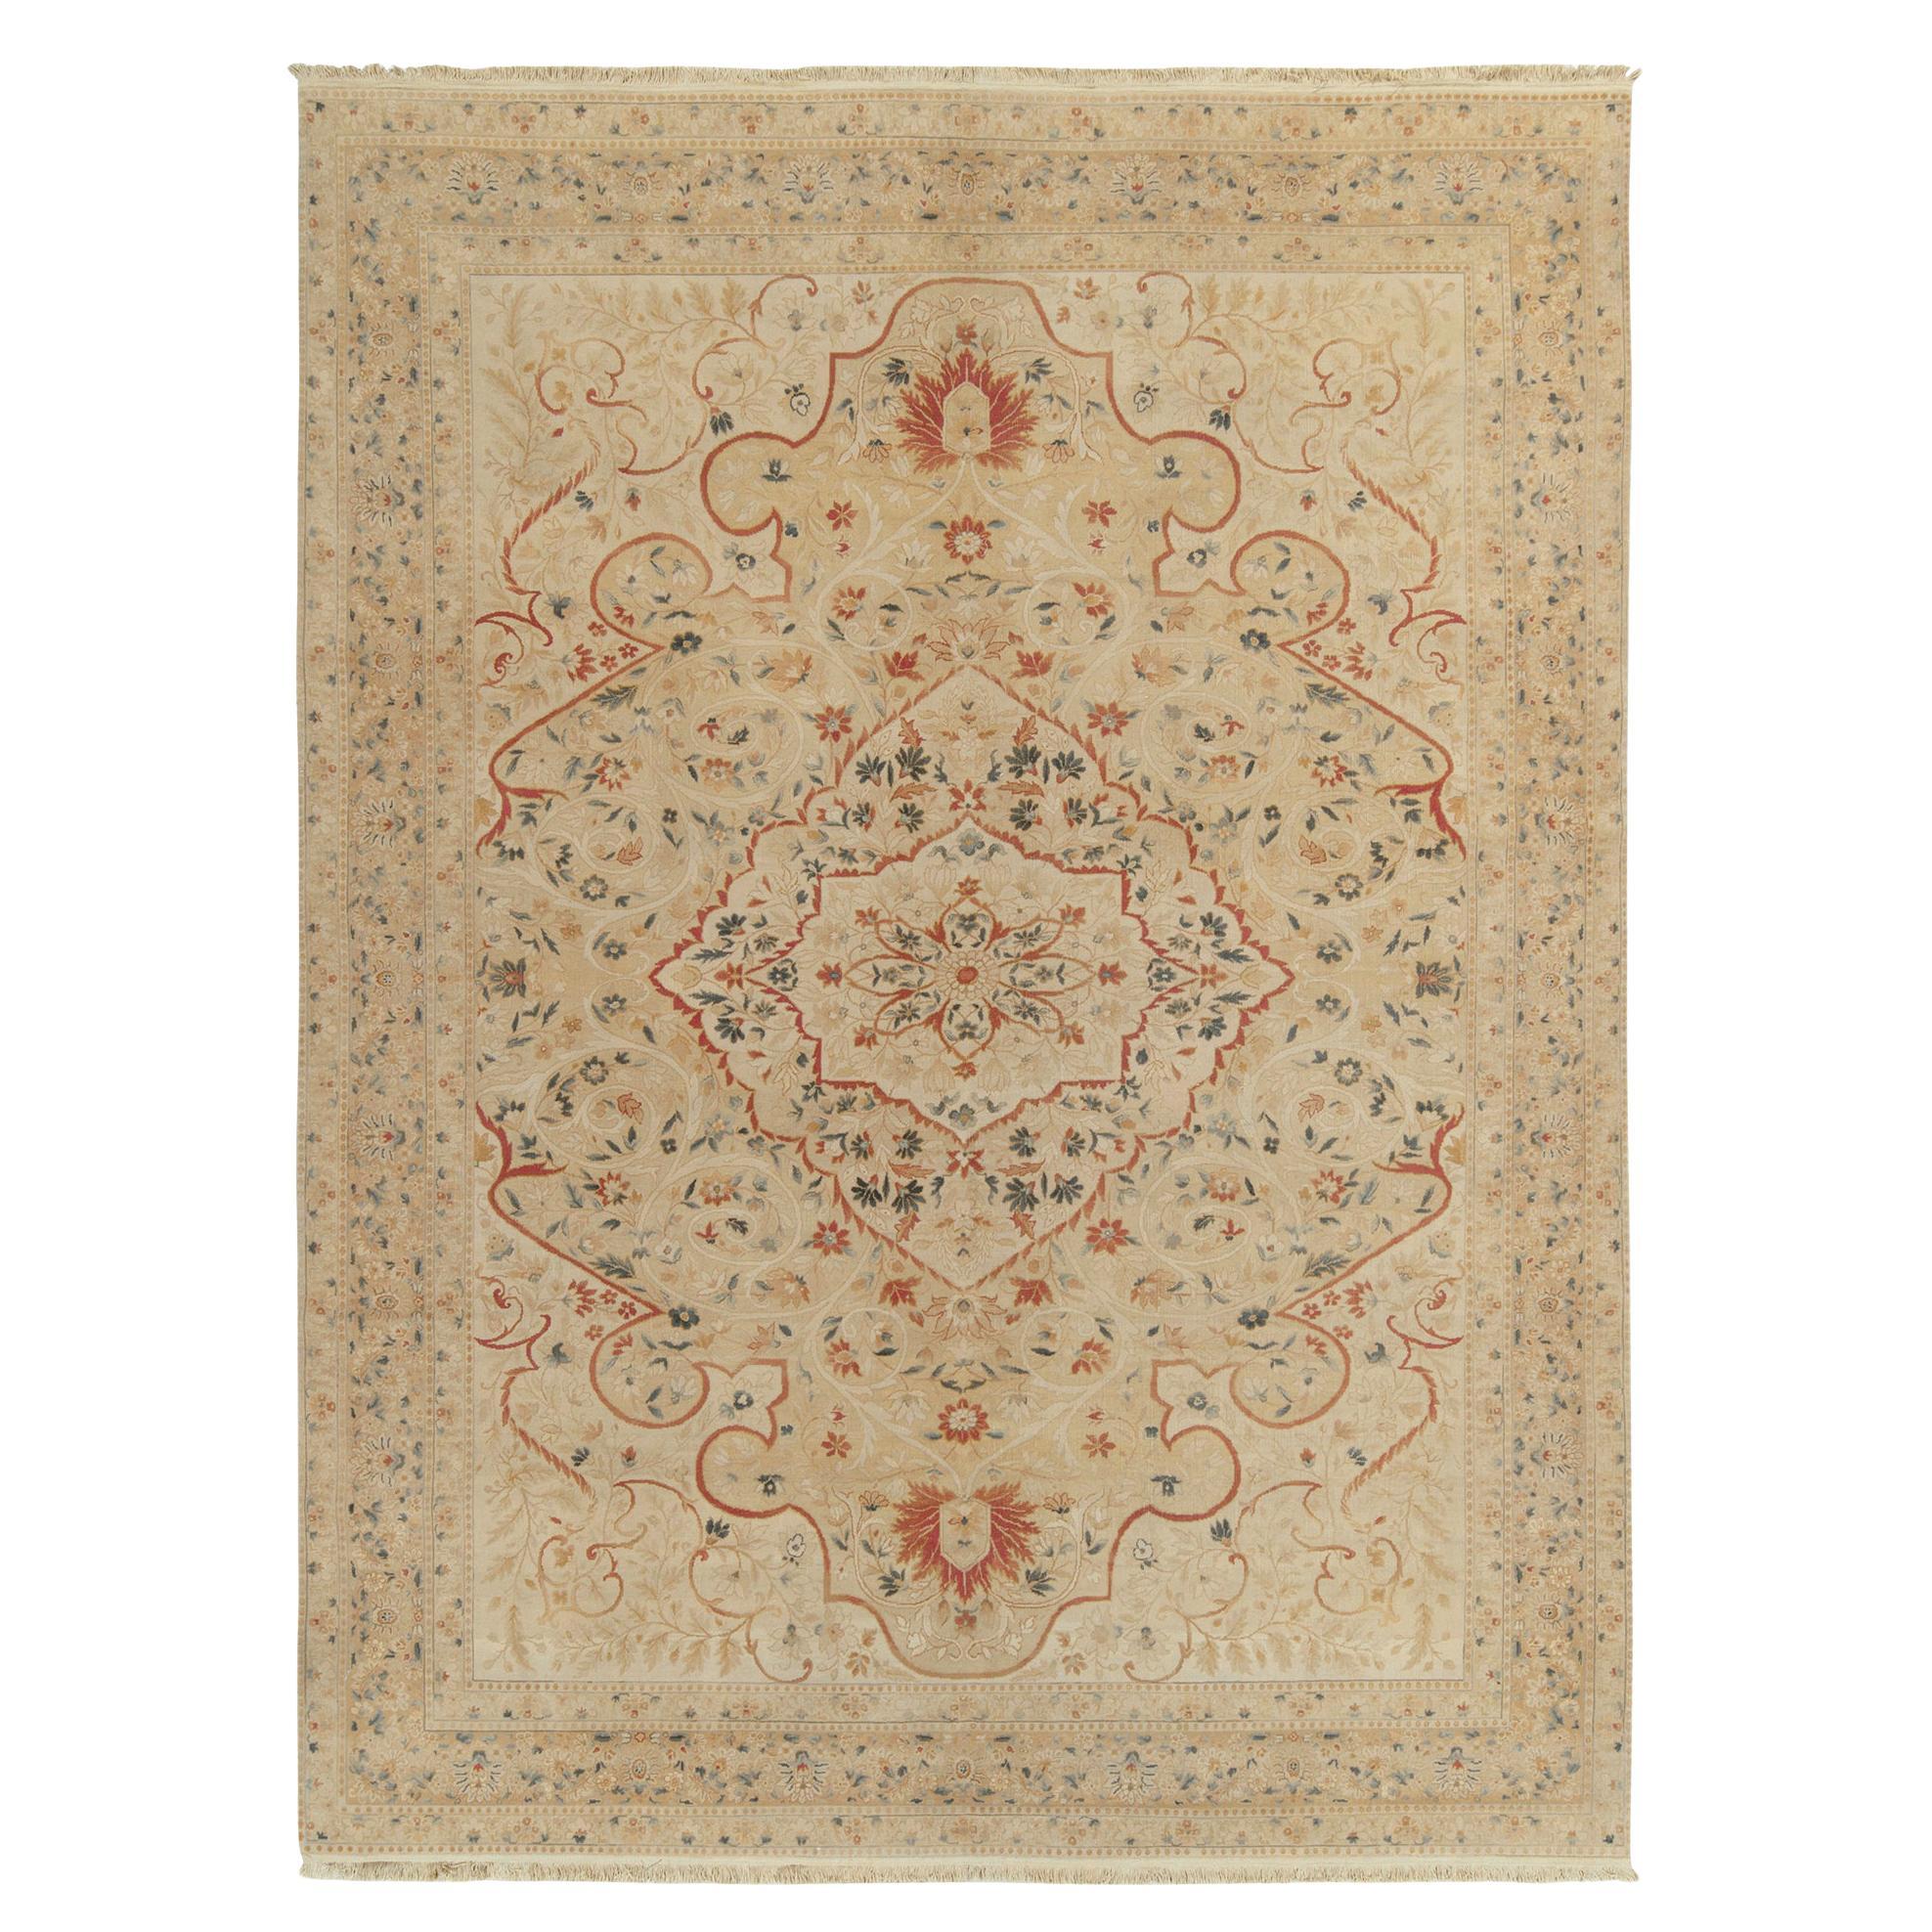 Rug & Kilim's Classic Tabriz Style Rug in Beige, Red & Green Floral Pattern For Sale